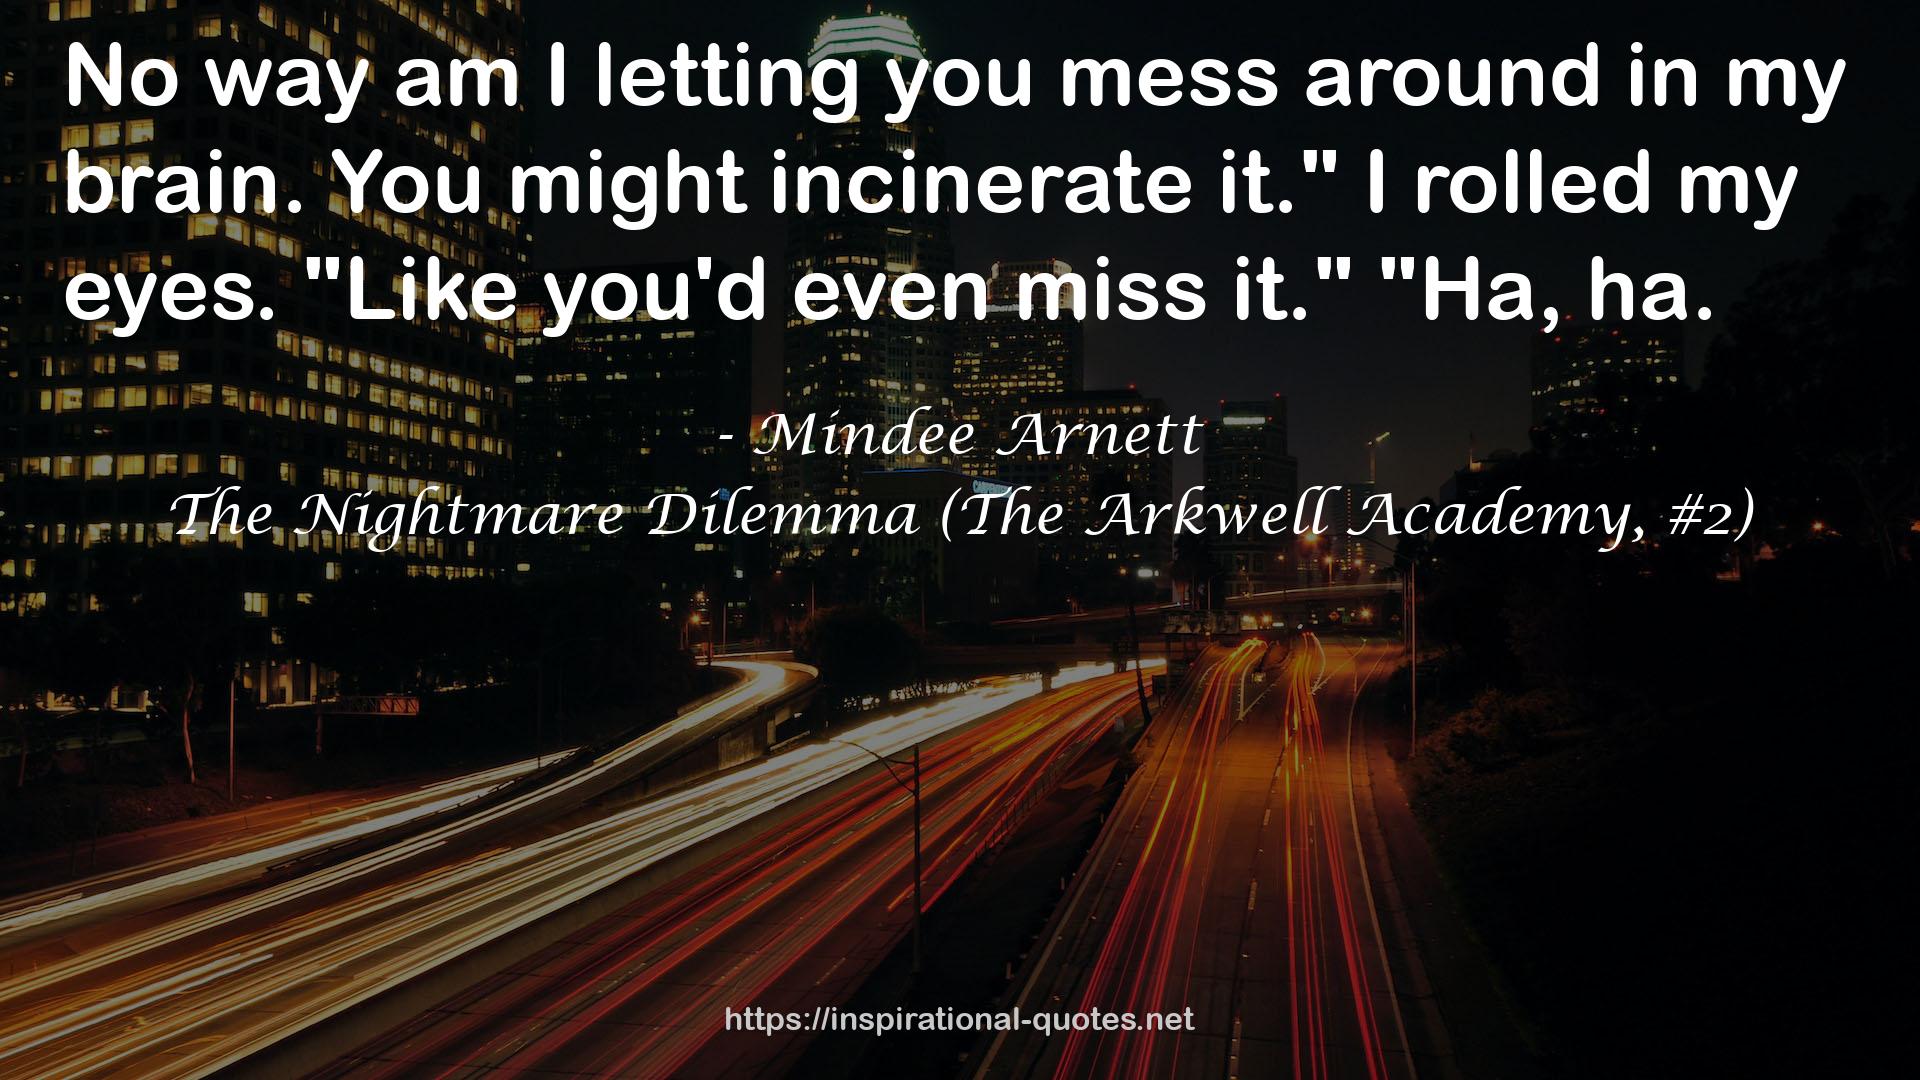 The Nightmare Dilemma (The Arkwell Academy, #2) QUOTES